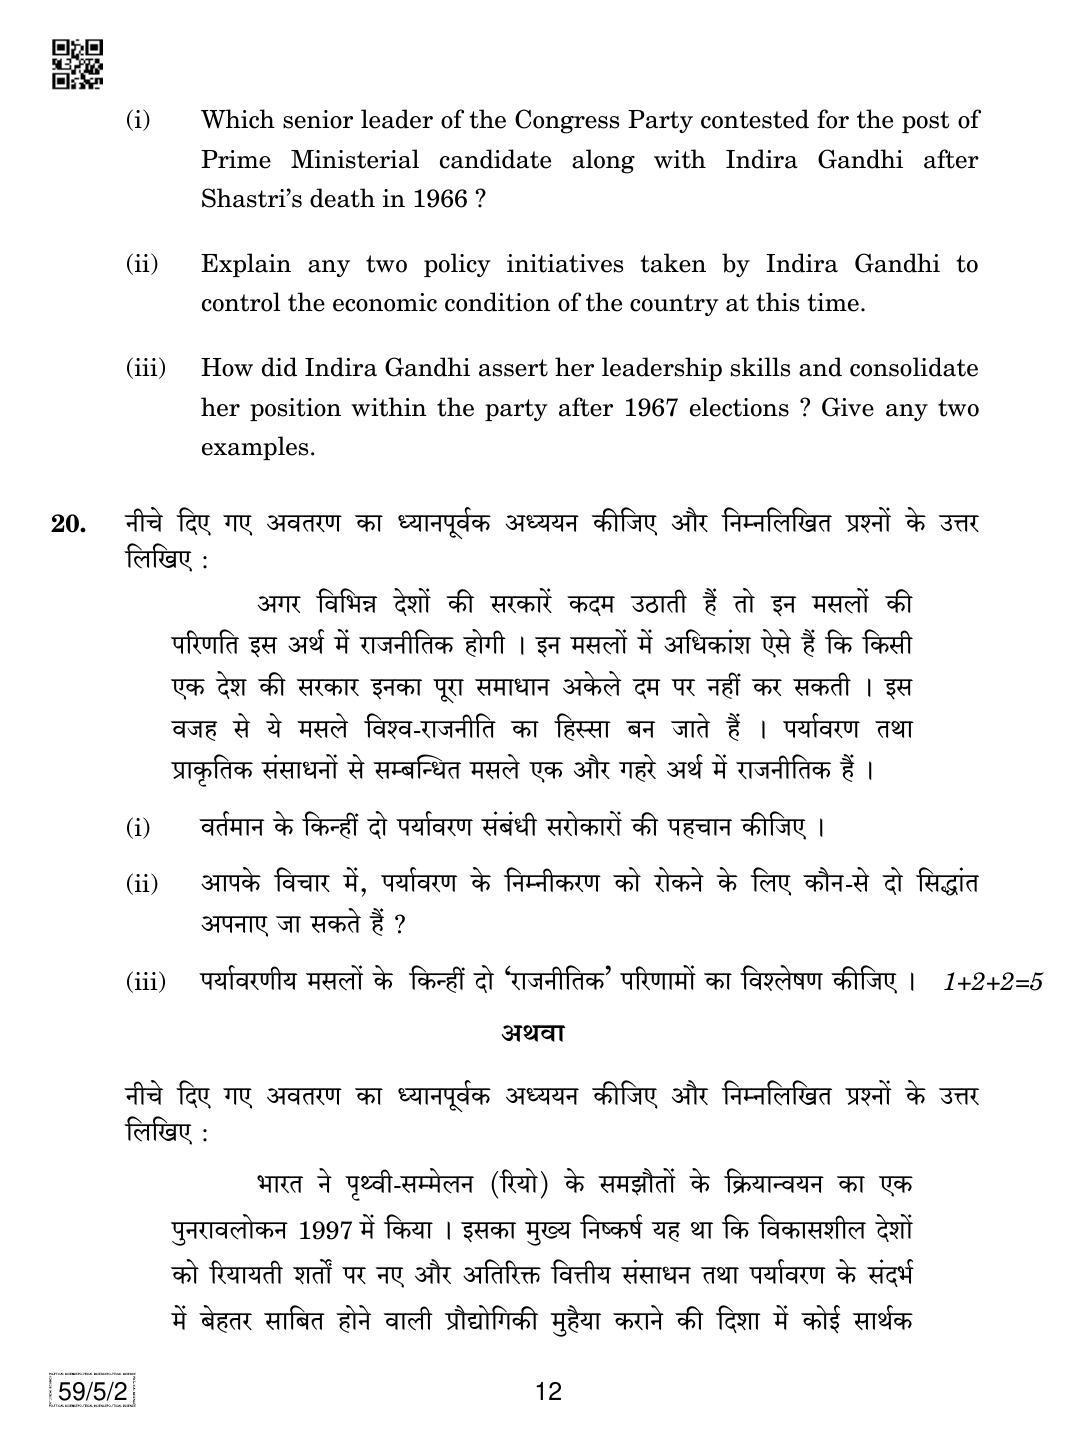 CBSE Class 12 59-5-2 Political Science 2019 Question Paper - Page 12